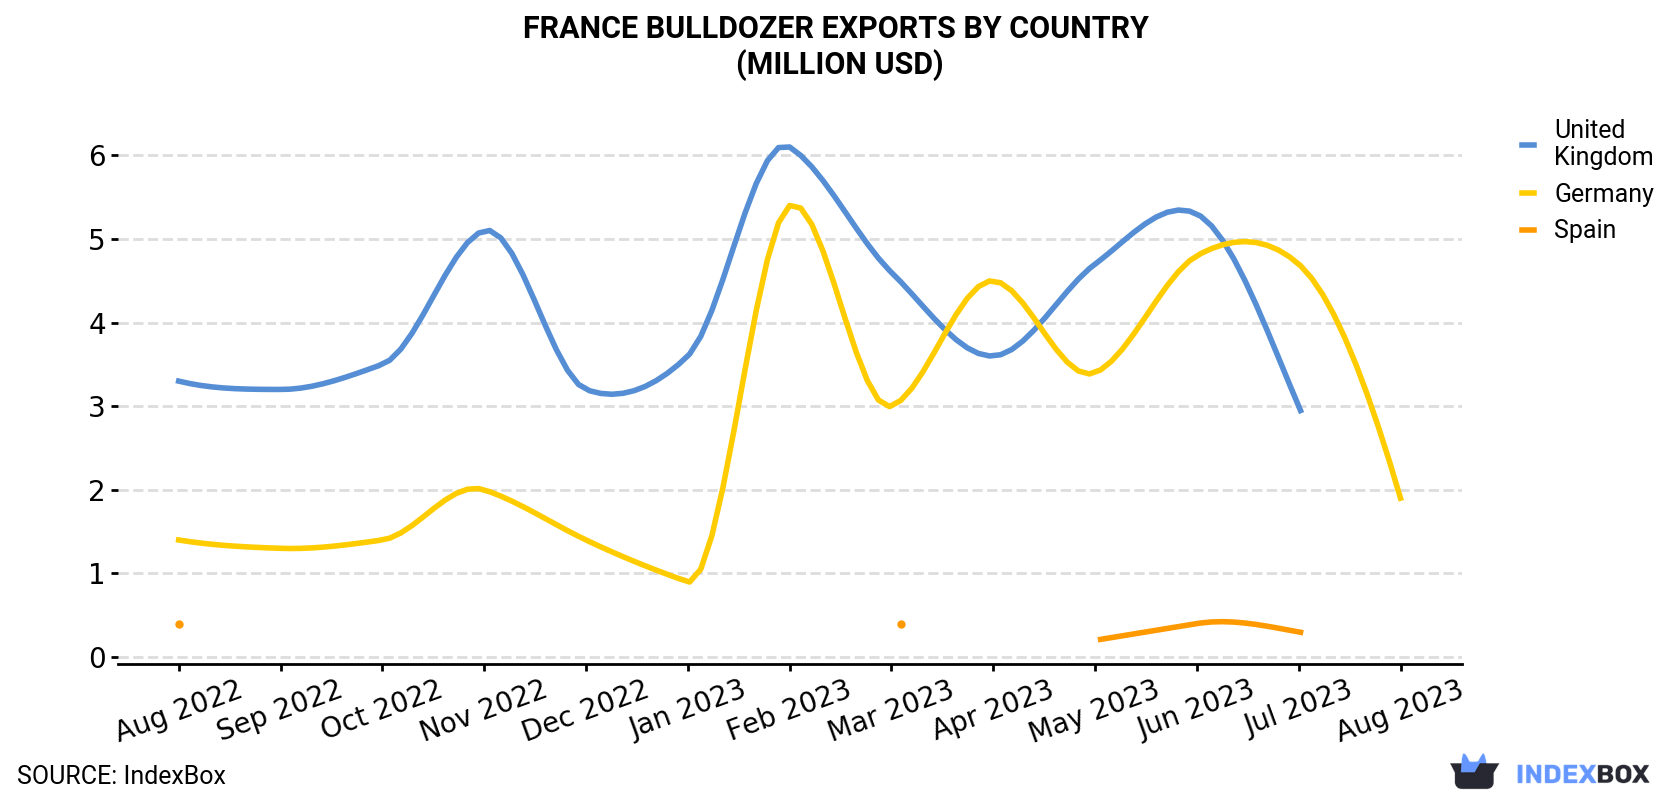 France Bulldozer Exports By Country (Million USD)